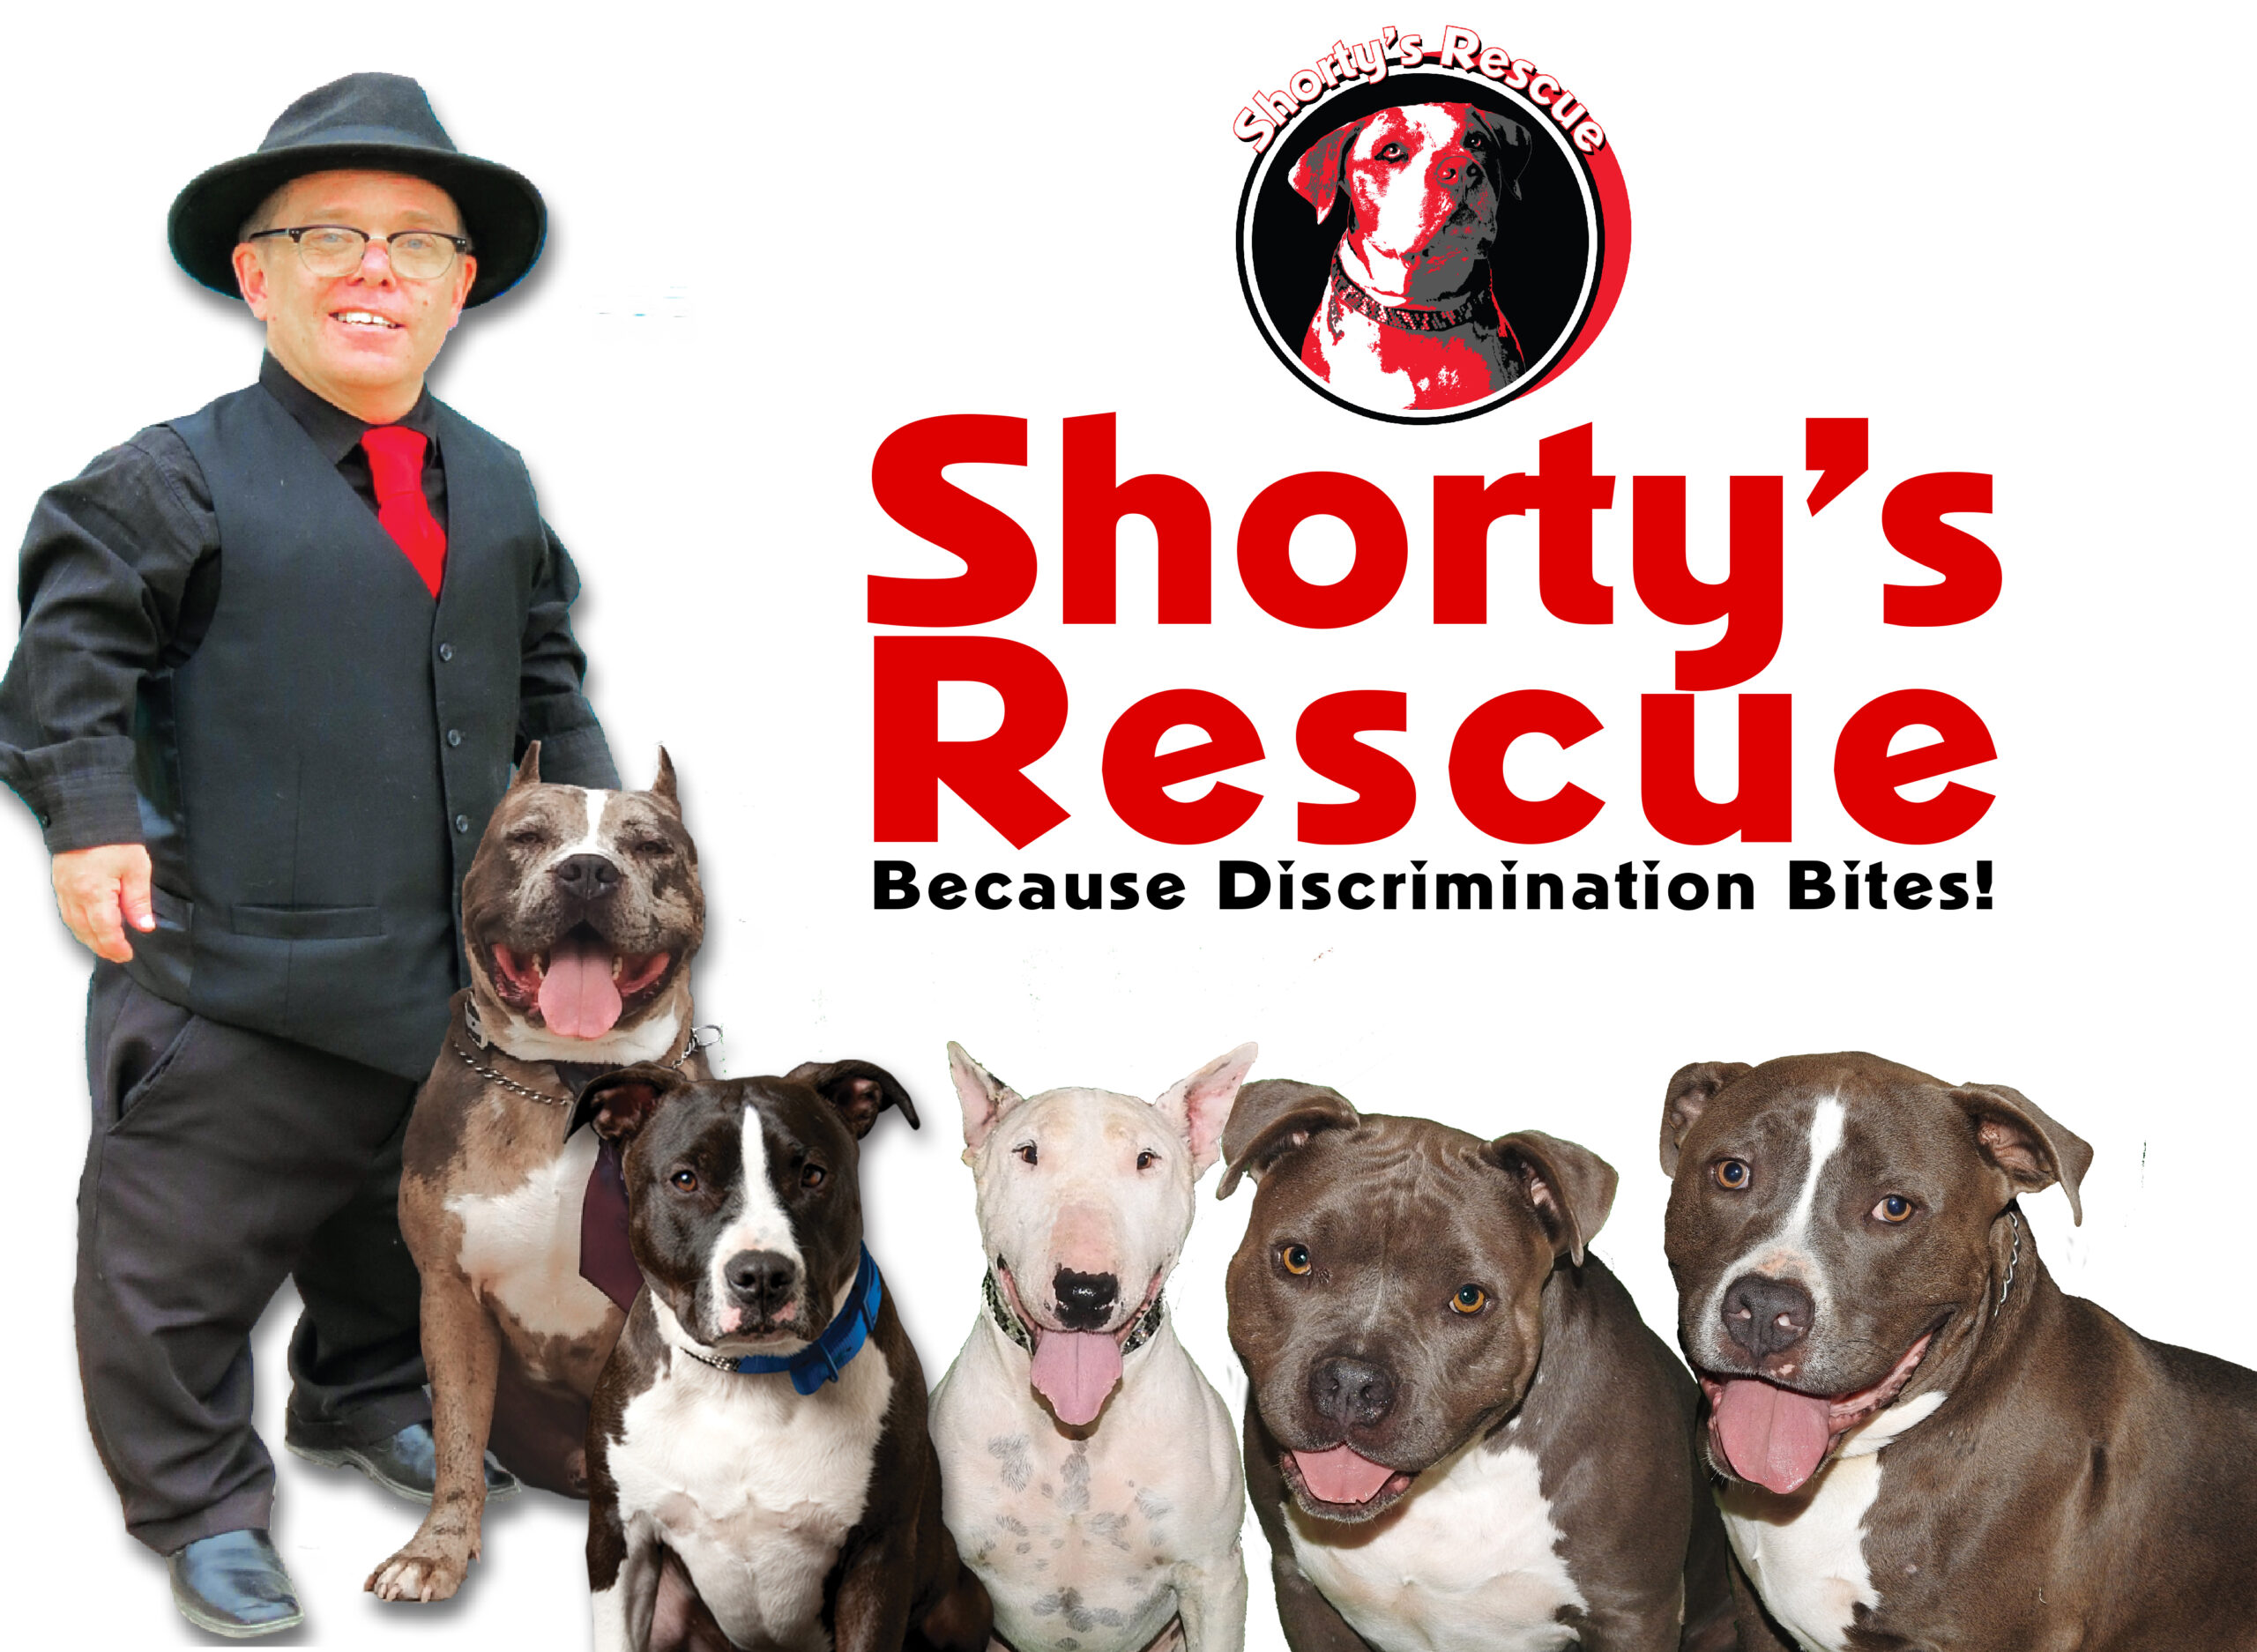 Shorty's Rescue - Because Discrimination Bites